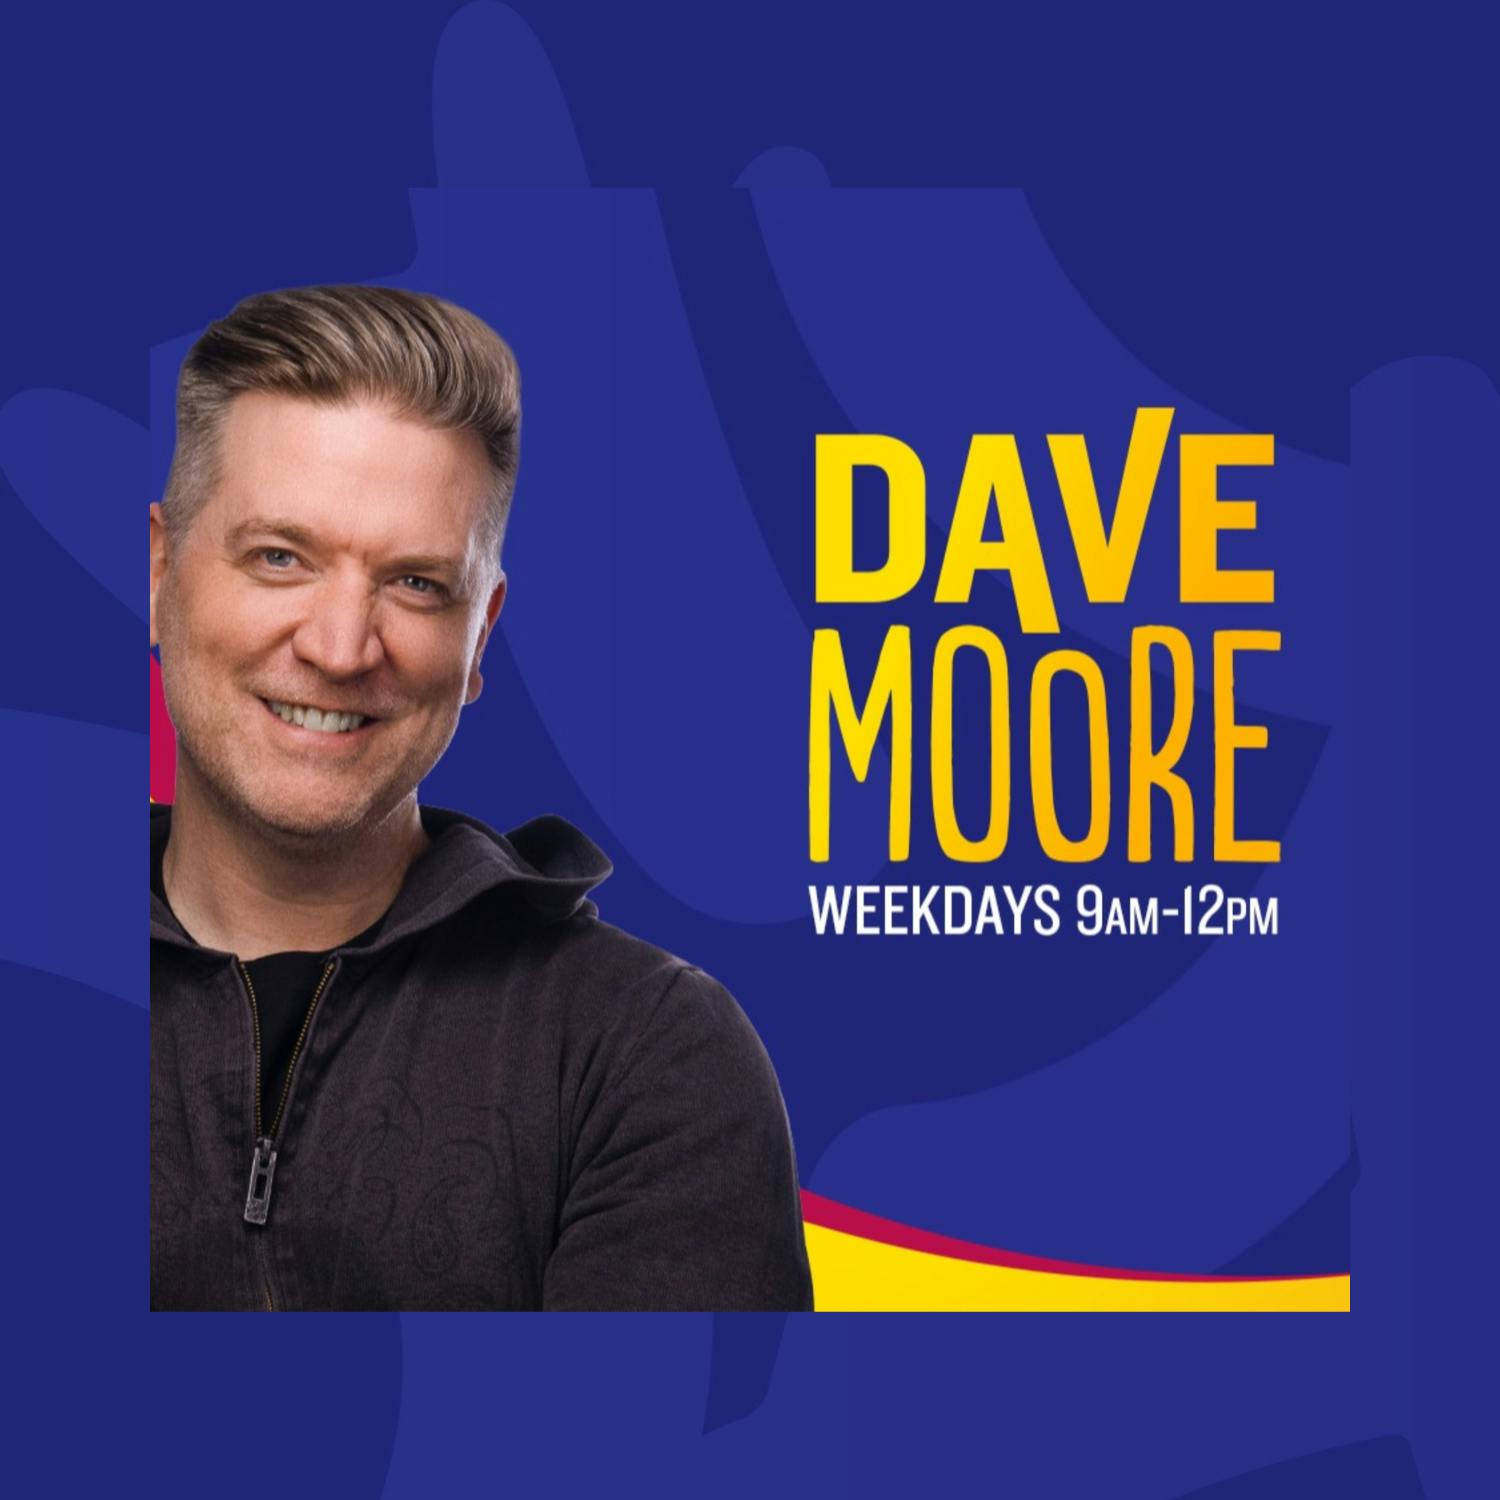 The Dave Moore Podcast: Rapping In The Noughties And Creeping On Old Girlfriends